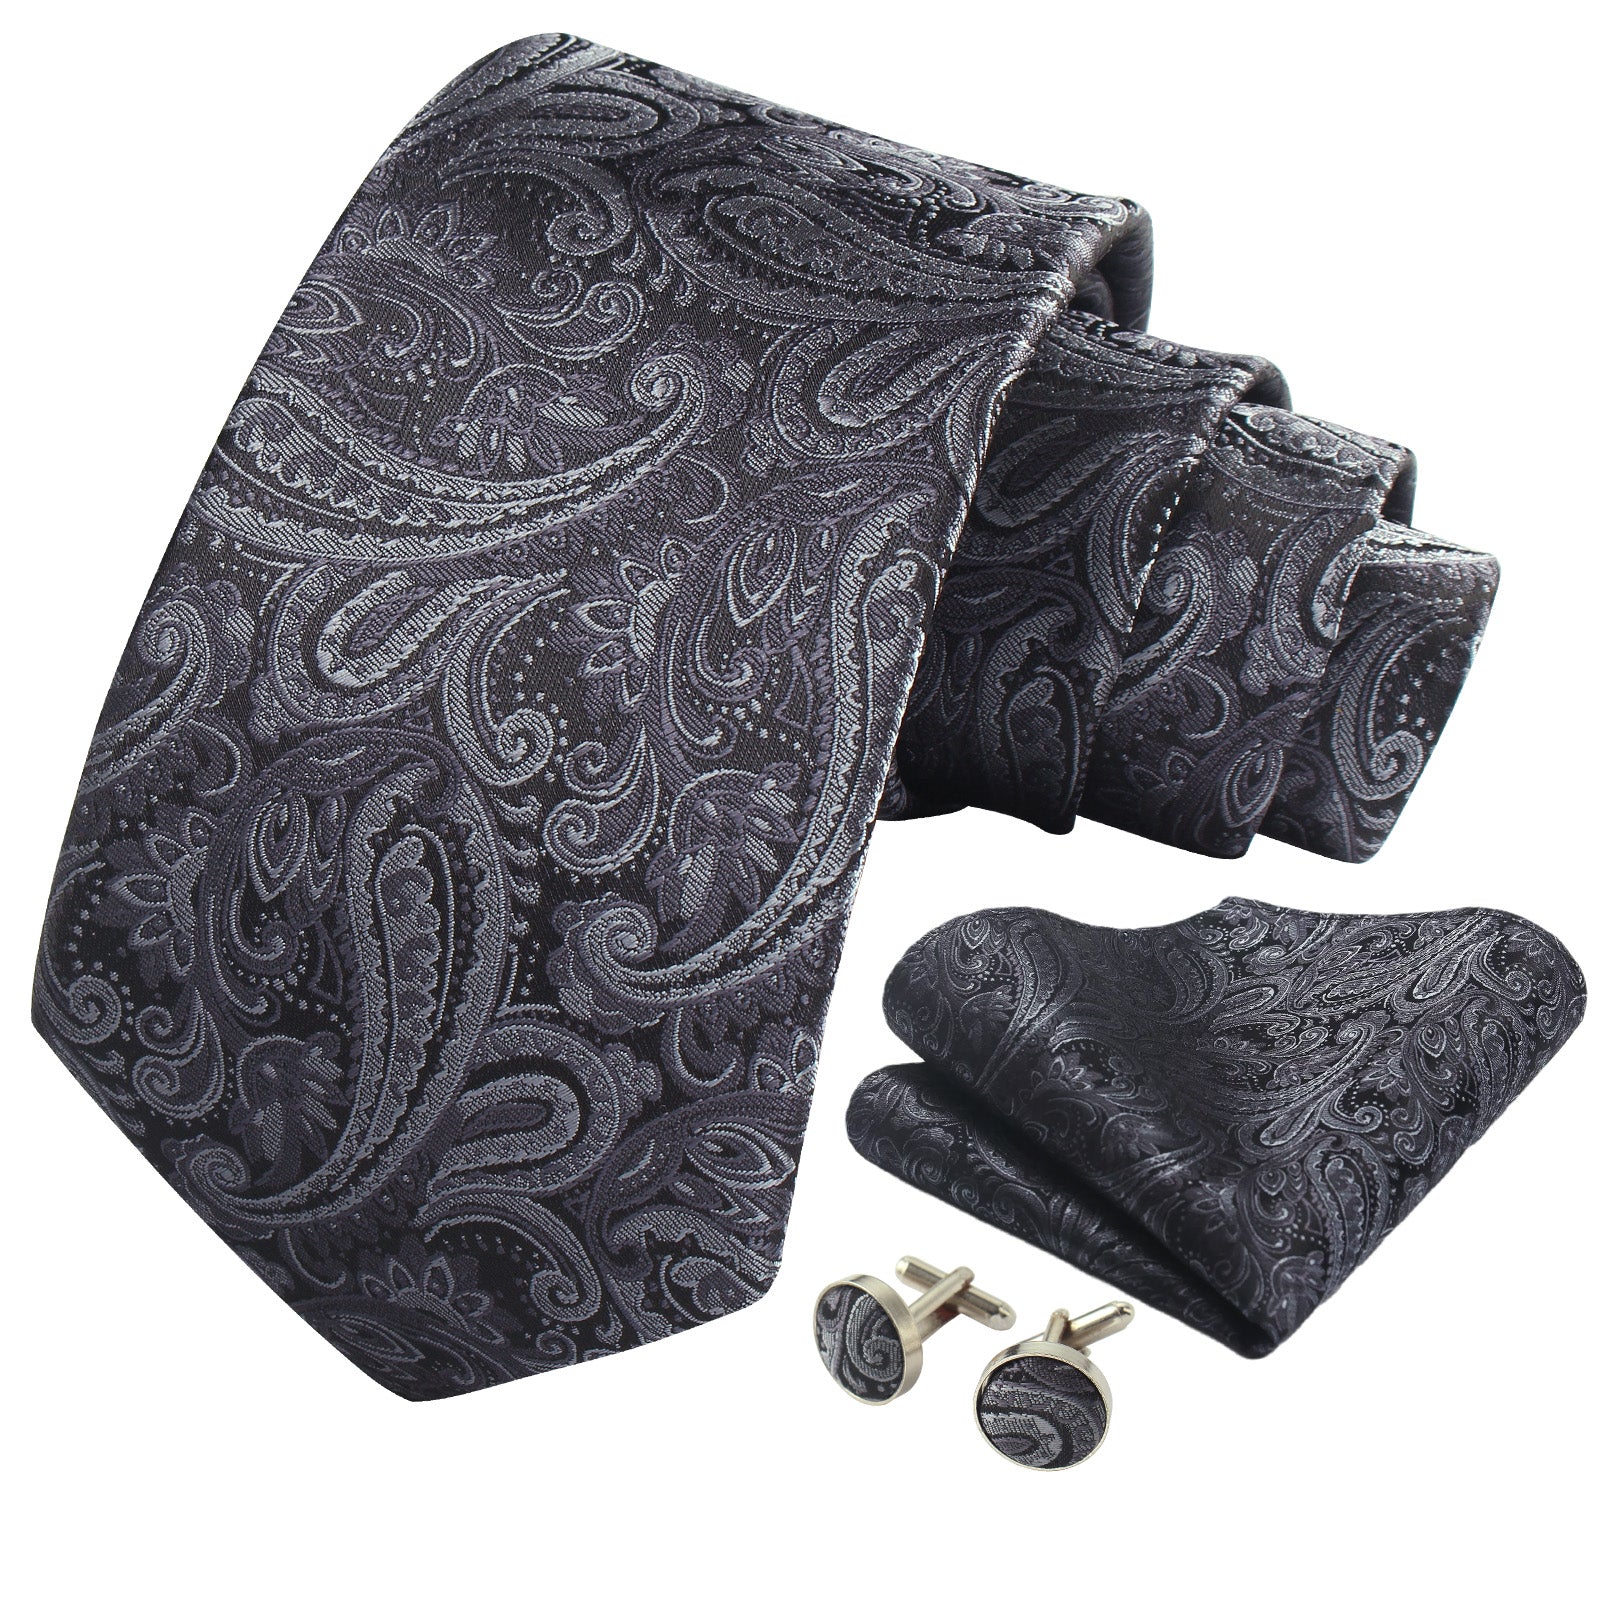 Classic Mens Necktie for Business Paisley Silk Tie with Tie Clip